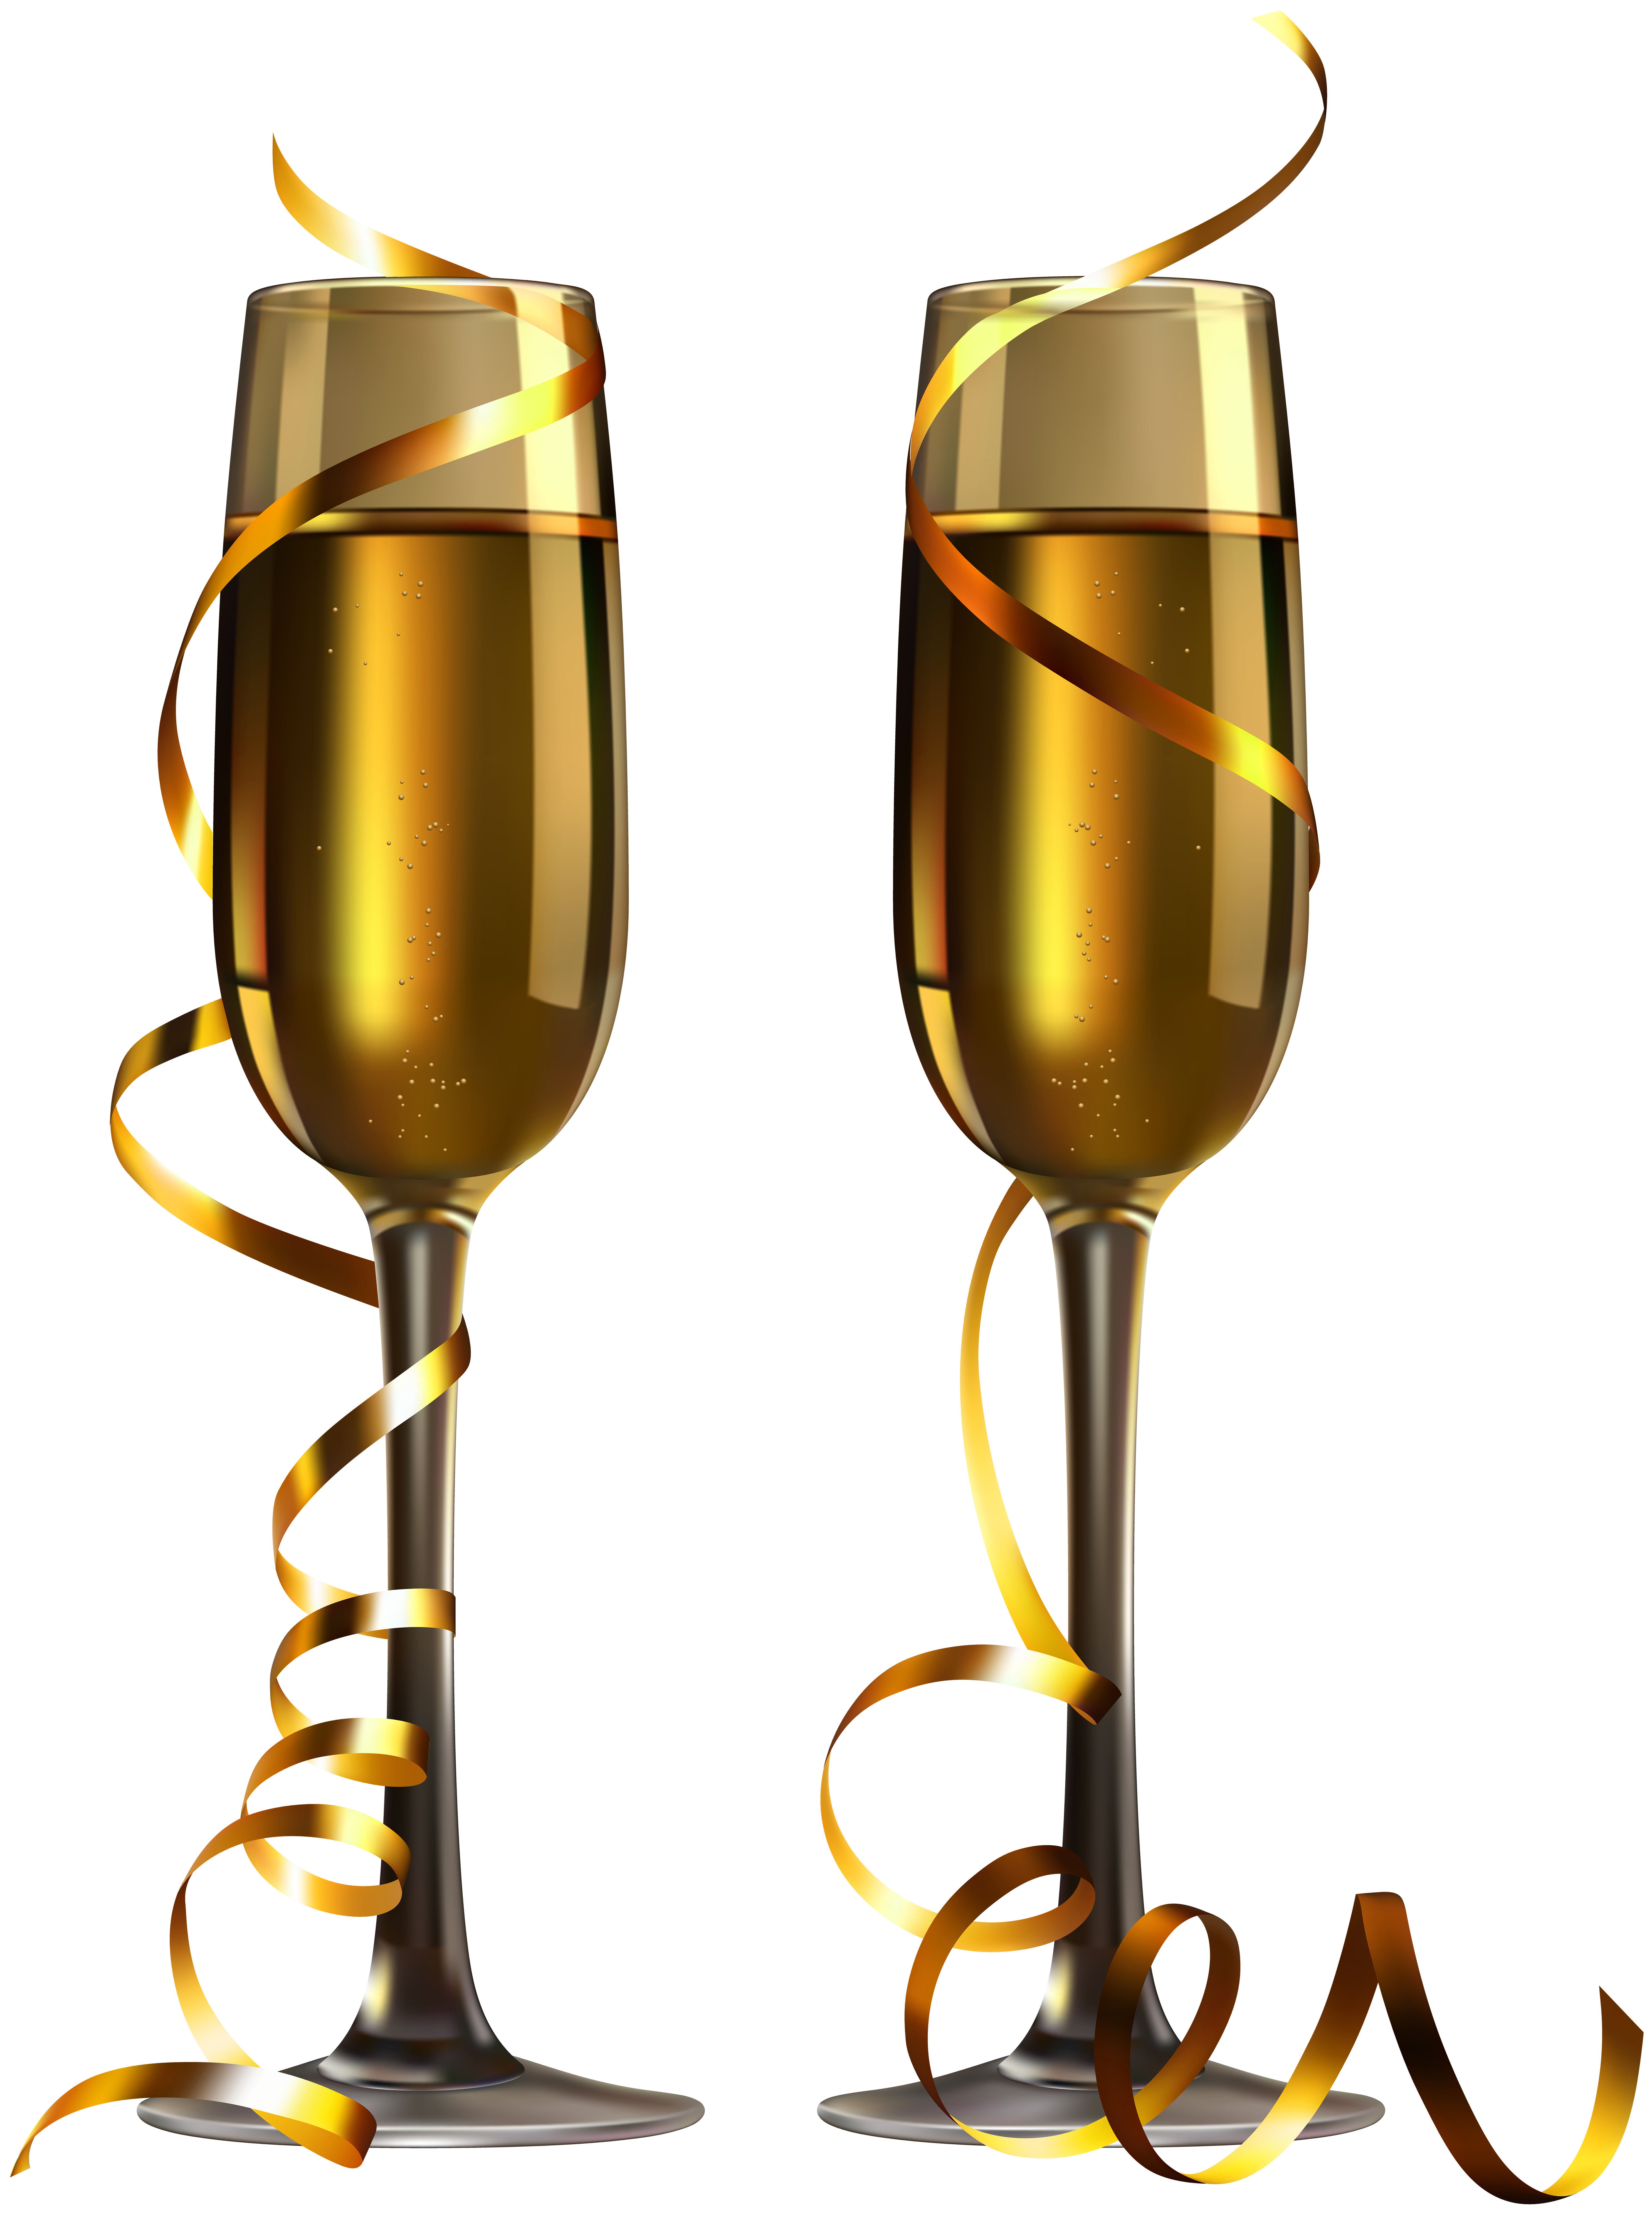 Glasses clipart new year, Glasses new year Transparent ...